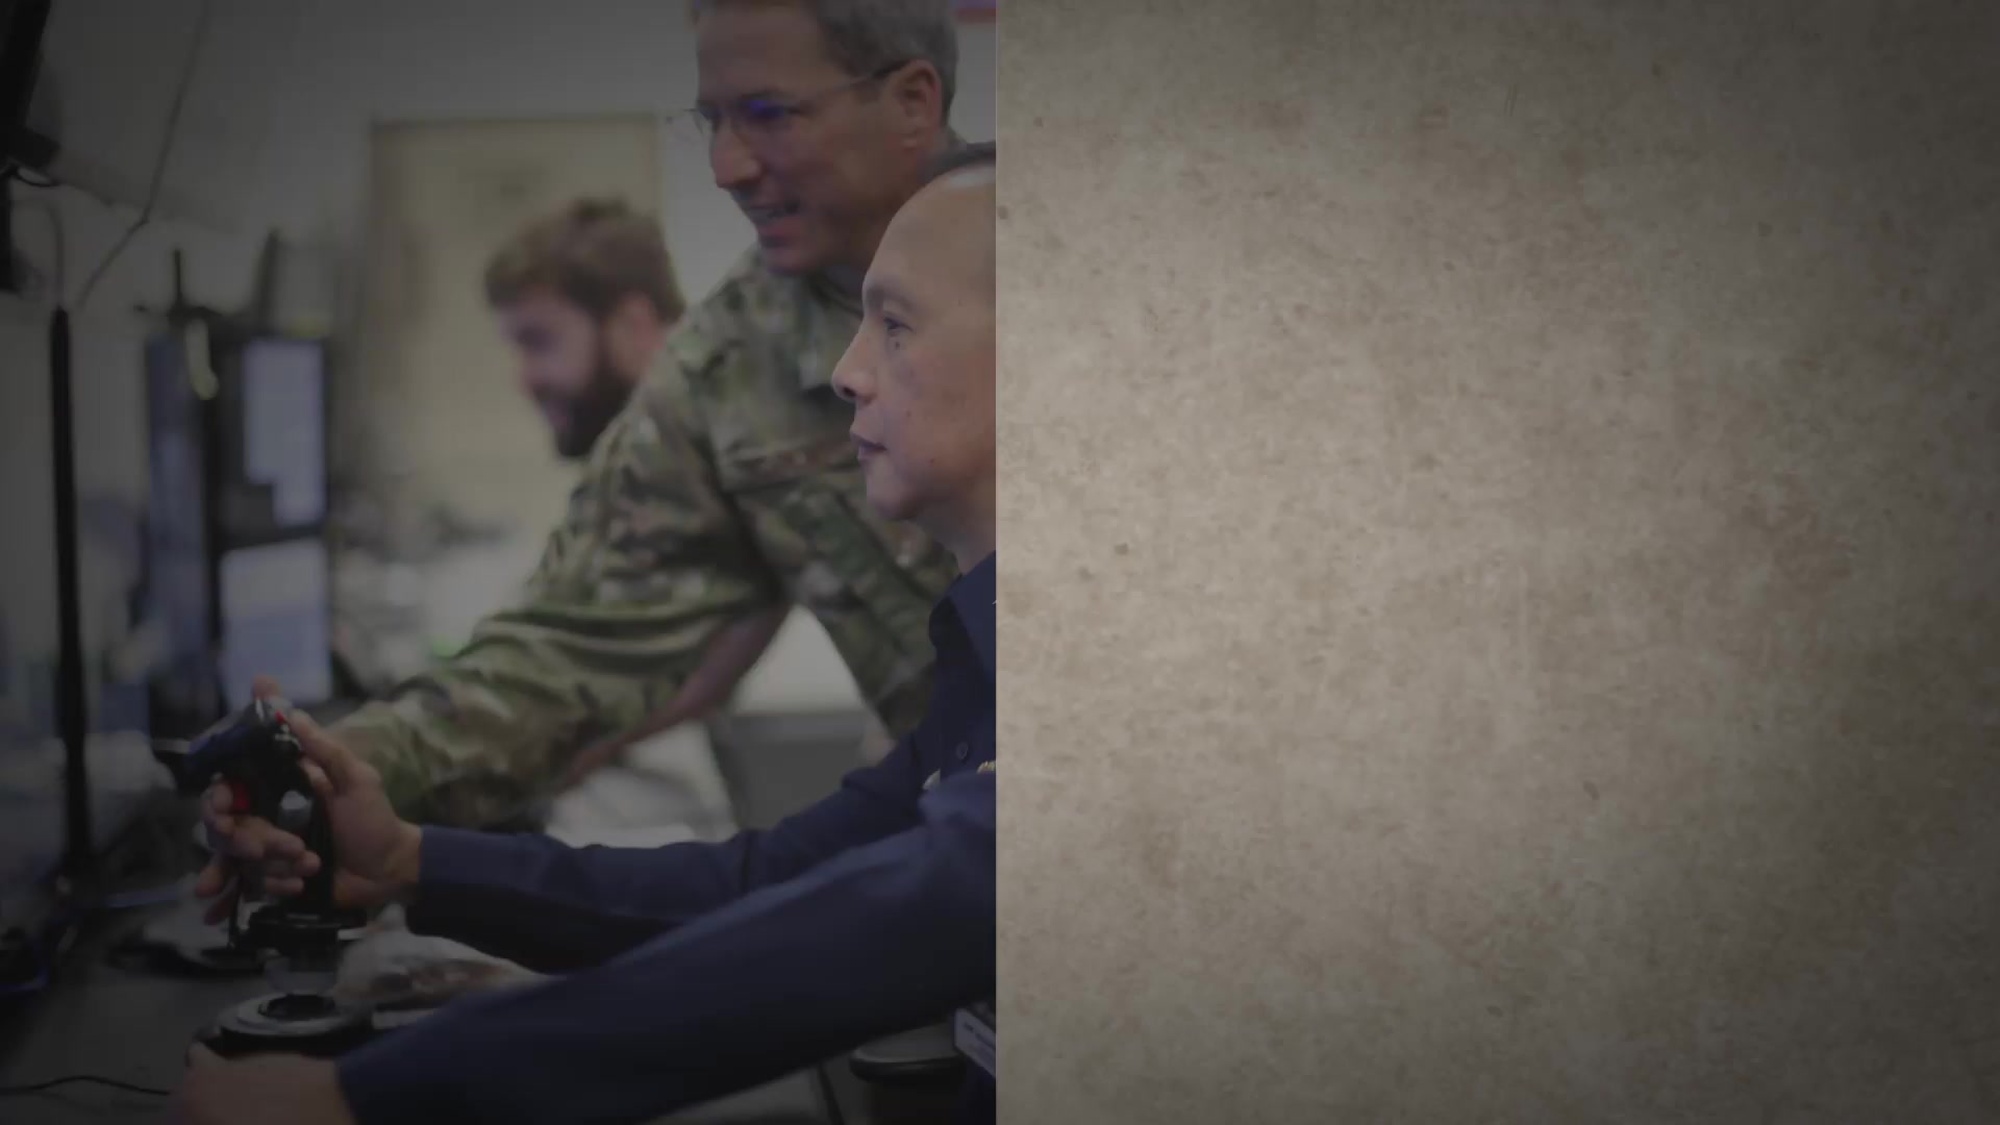 The Washington Air National Guard's 194th Wing is a special warfare, cyber and intel wing.